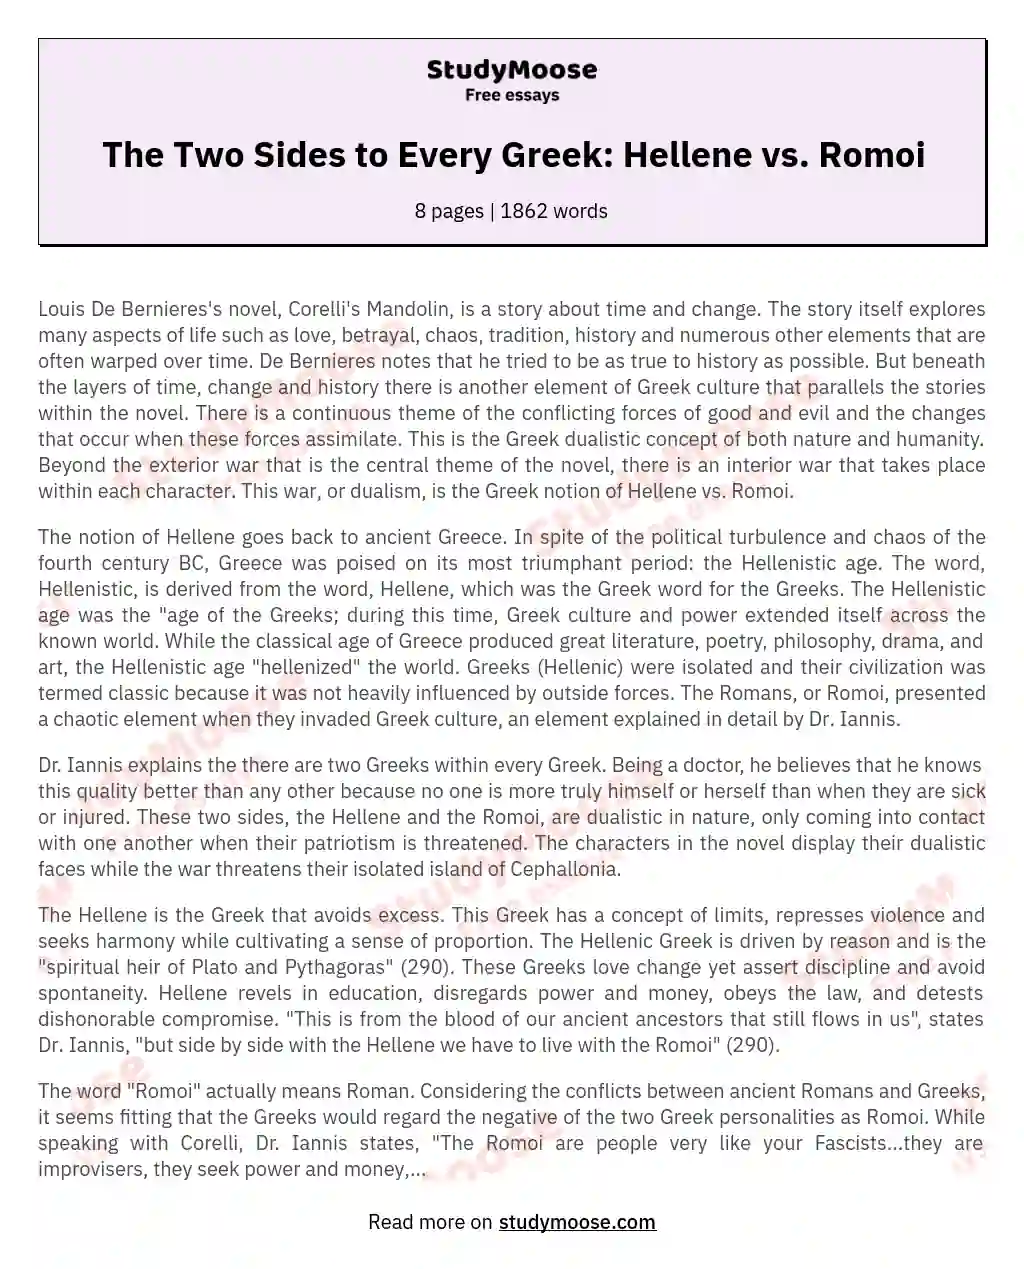 The Two Sides to Every Greek: Hellene vs. Romoi essay